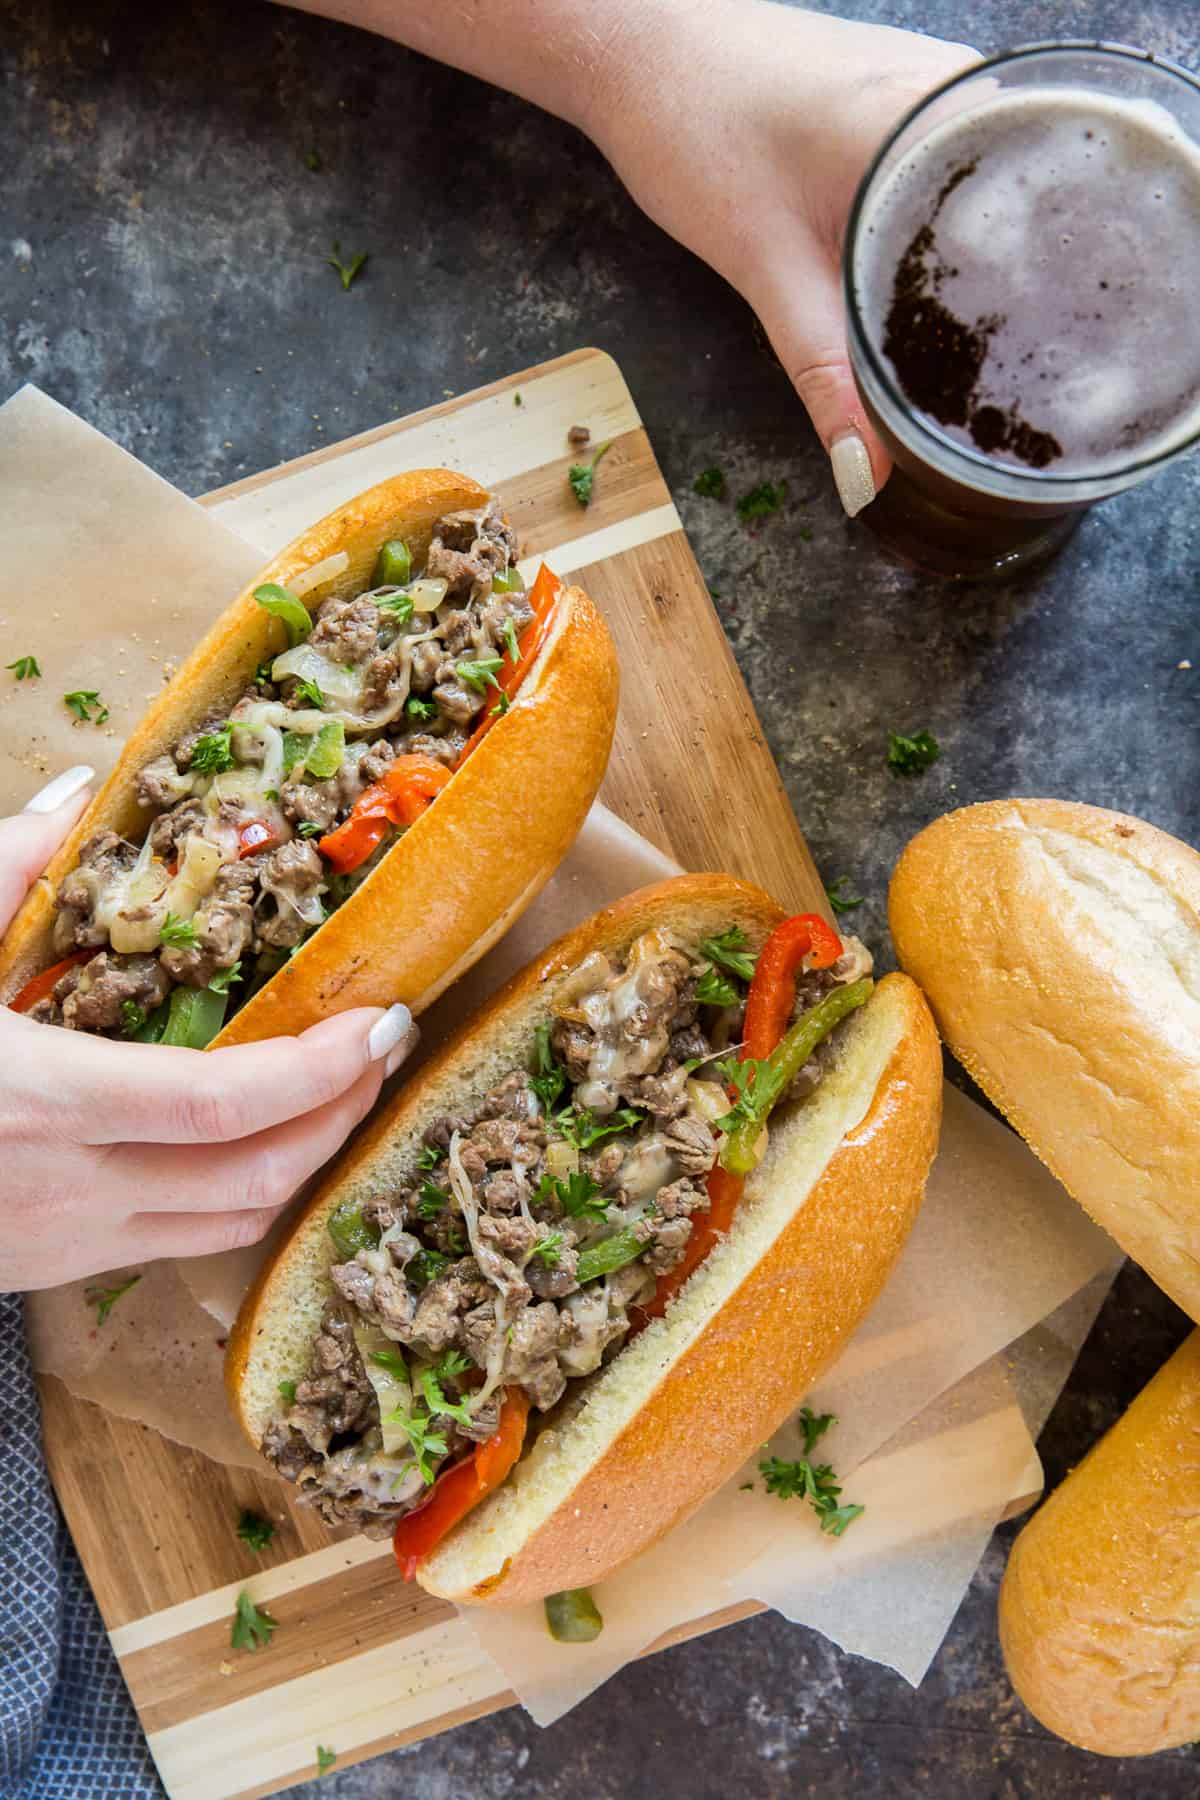 A hand holding a Philly cheesesteak while the other hand holds a glass of beer.